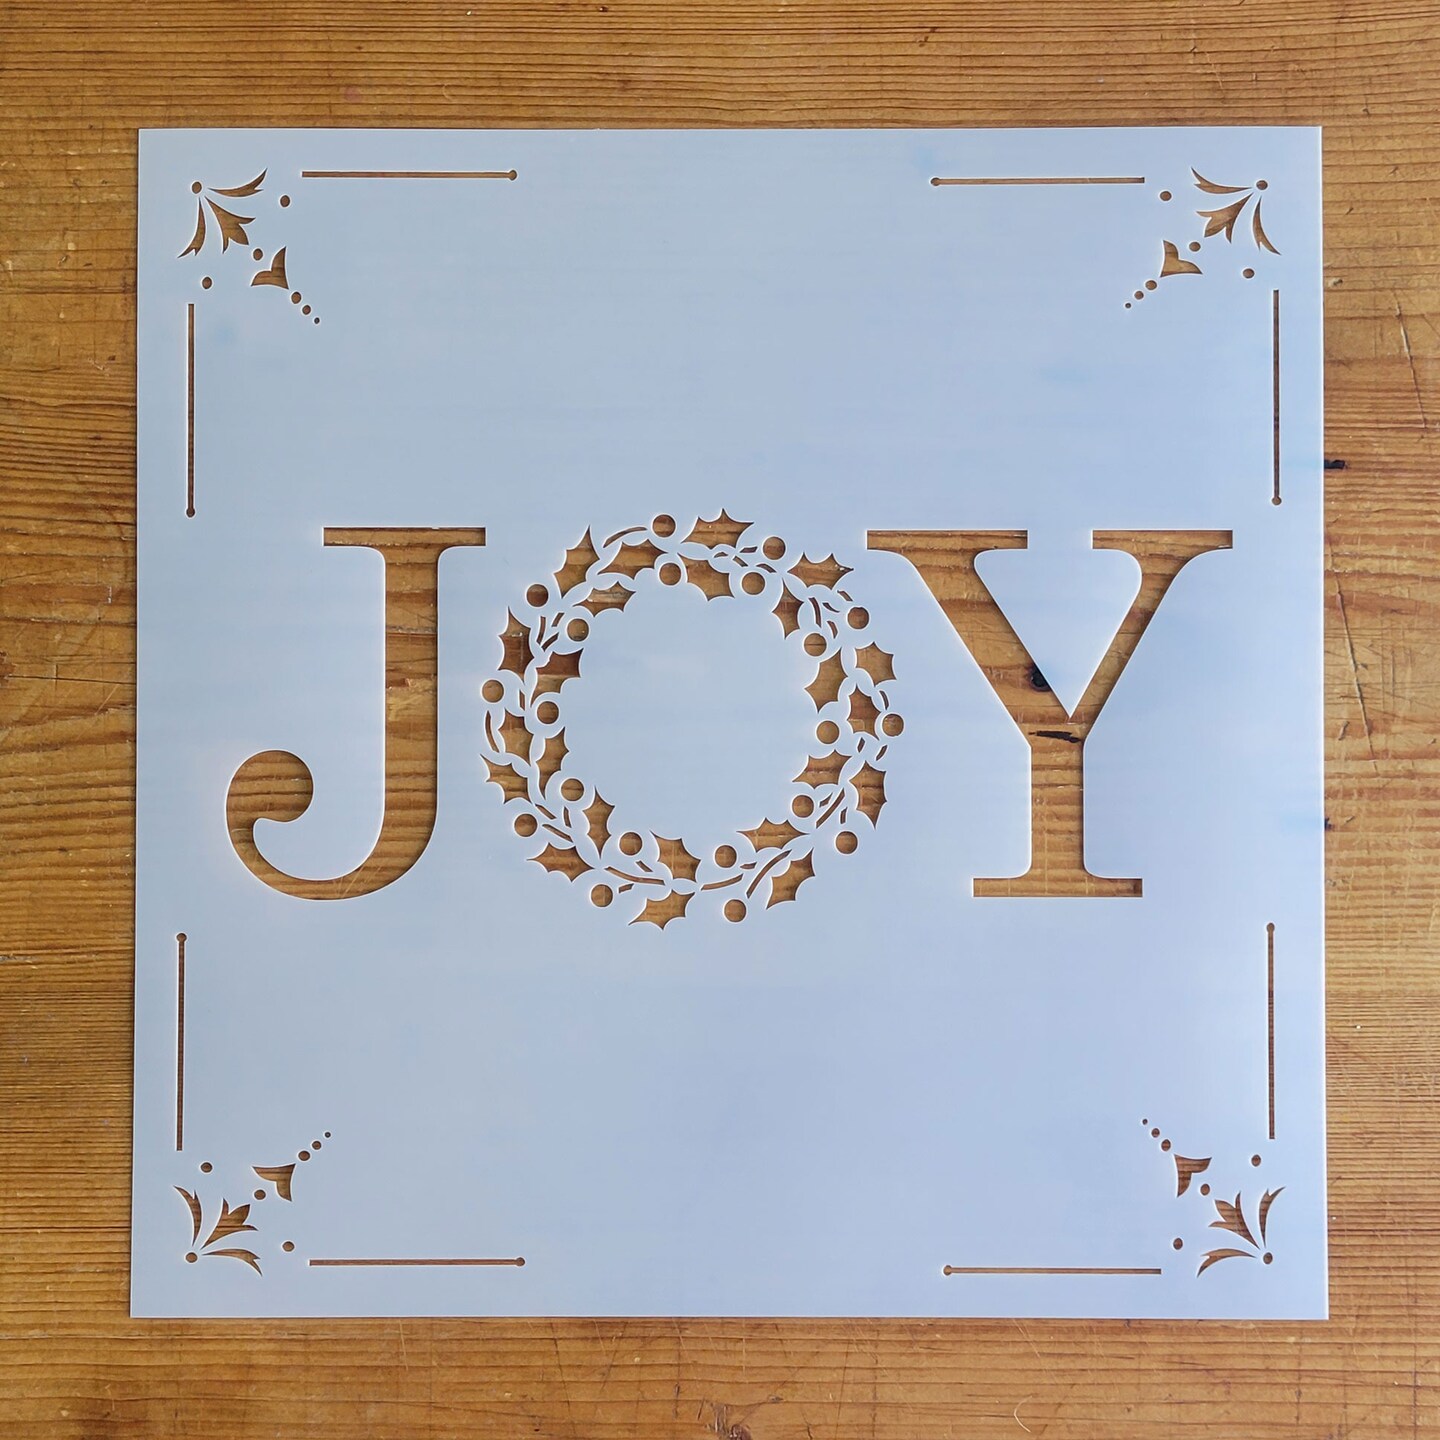 Joy with Holiday Wreath Embossing 12 x 12 Stencil | FS105 by Designer Stencils | Word &#x26; Phrase Stencils | Reusable Stencils for Painting on Wood, Wall, Tile, Canvas, Paper, Fabric, Furniture, Floor | Reusable Stencil for Home Makeover